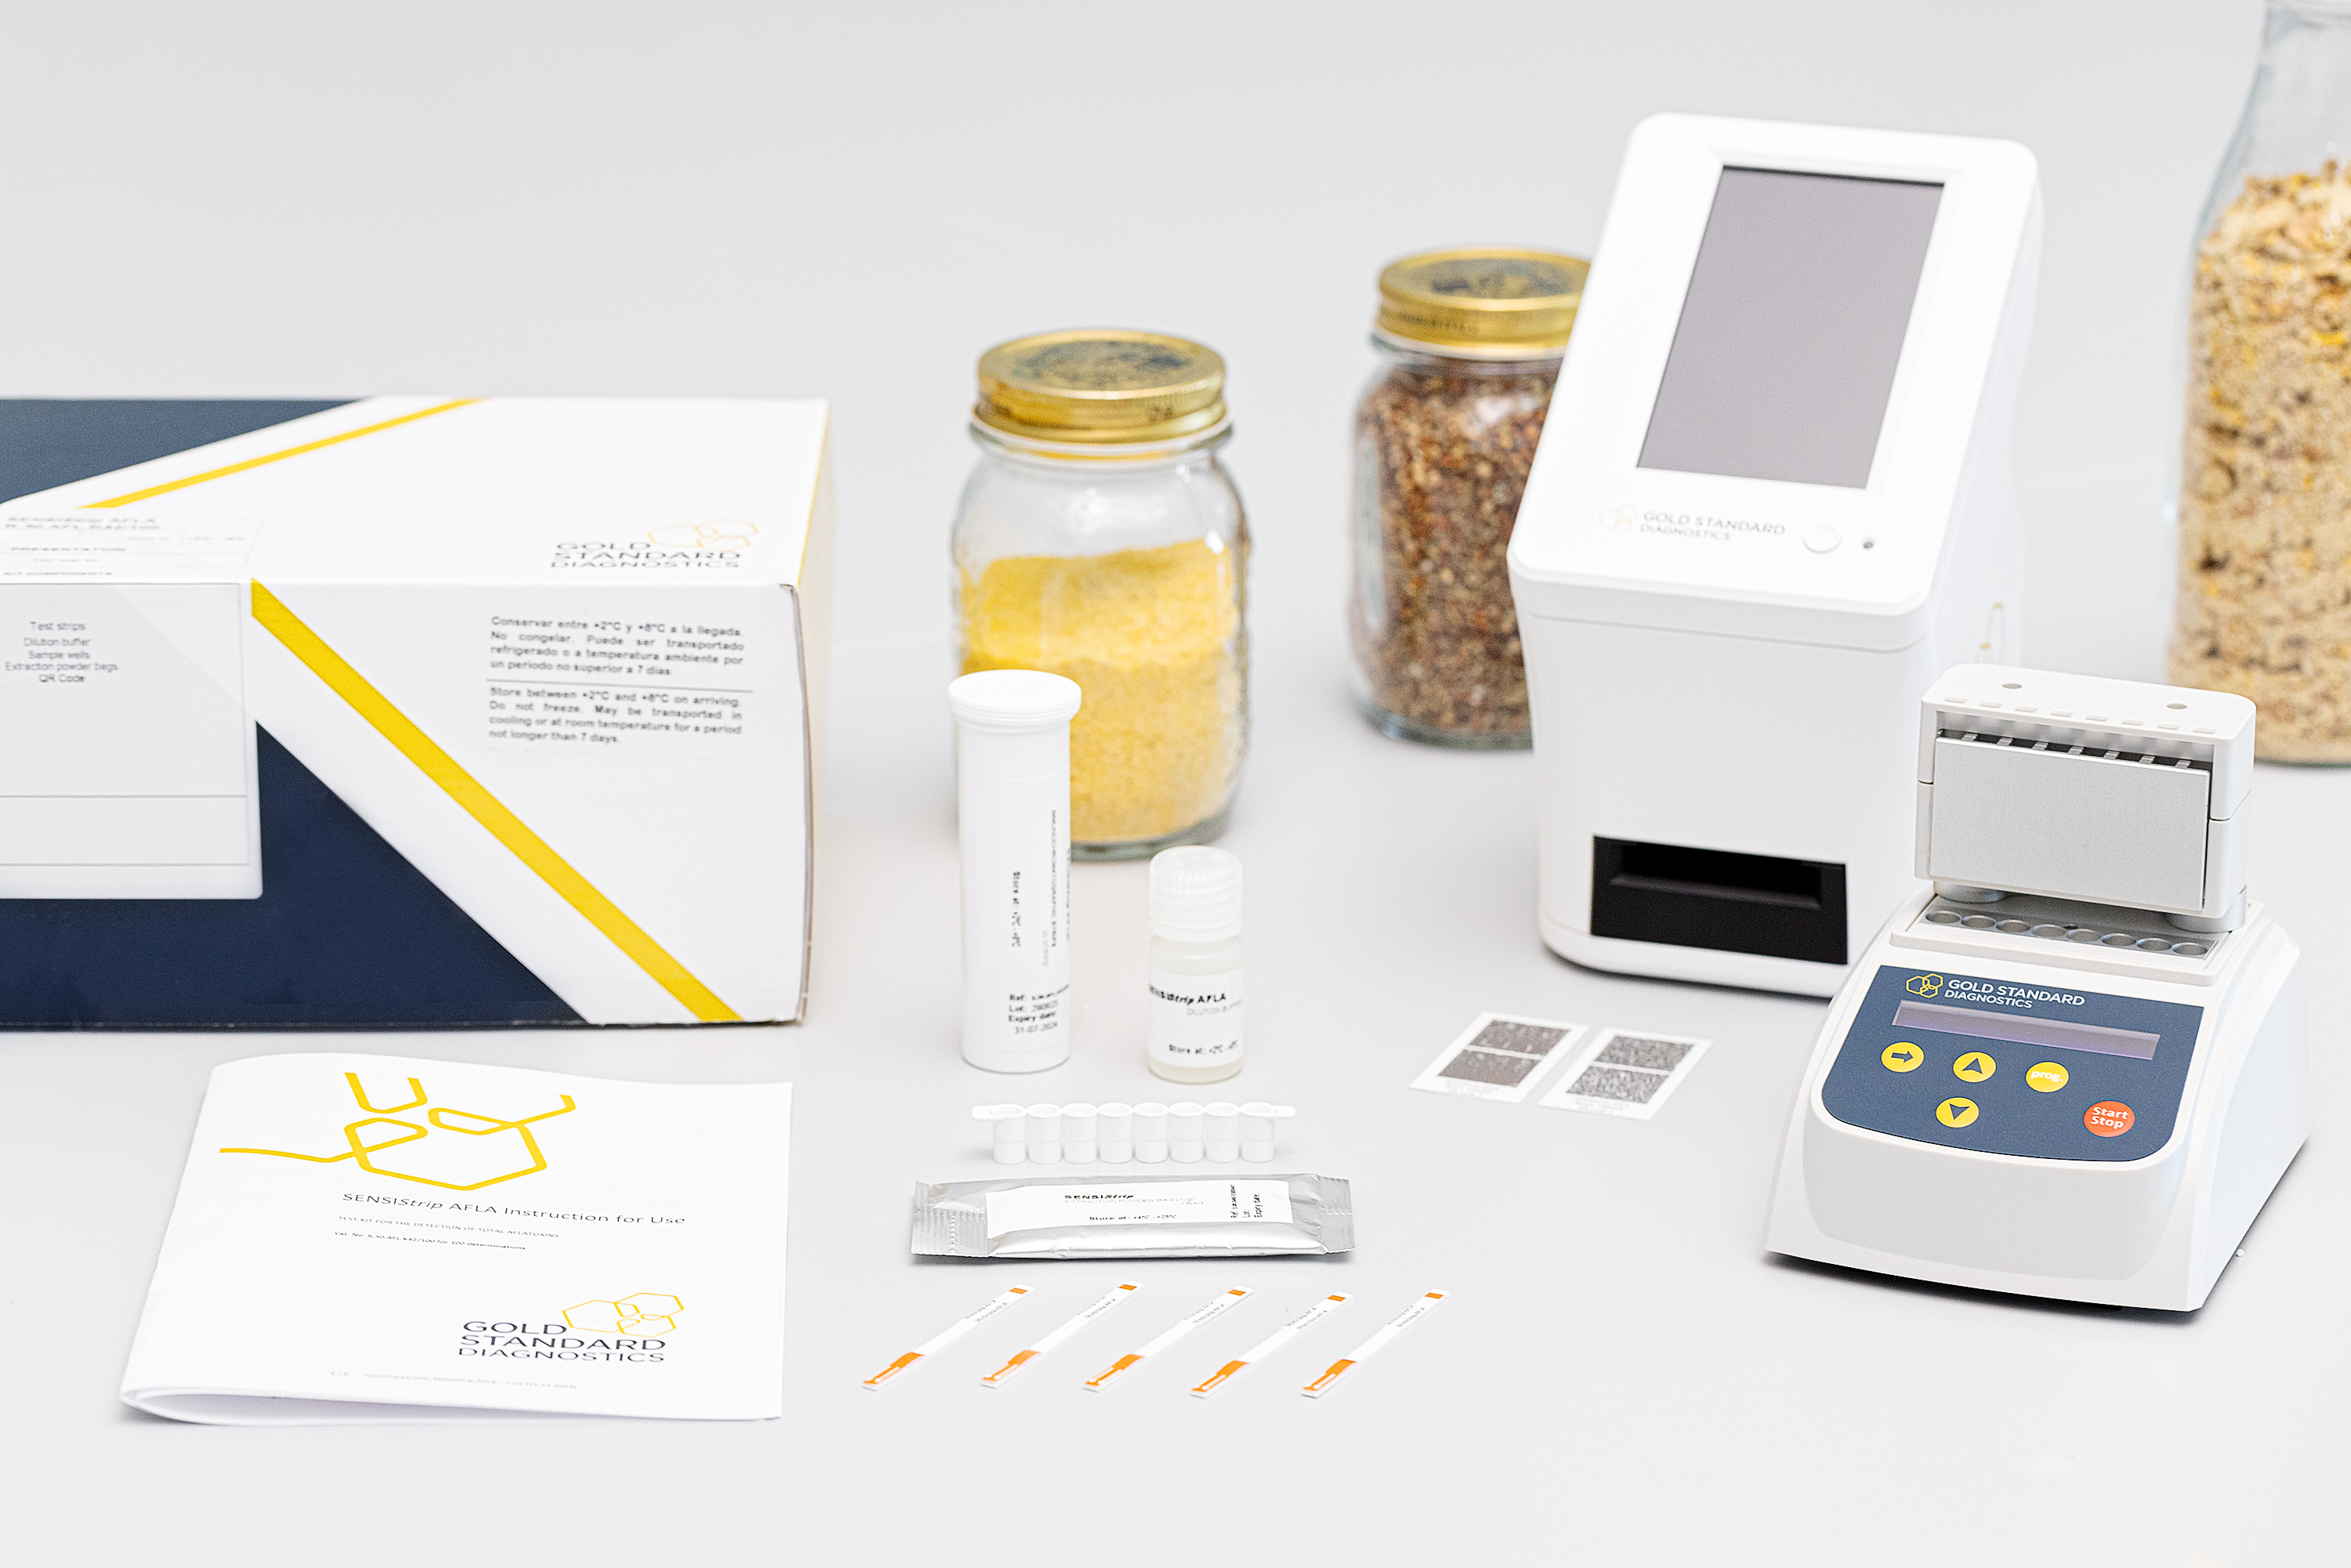 Quickest Lab-on-a-field solution for mycotoxins early detection